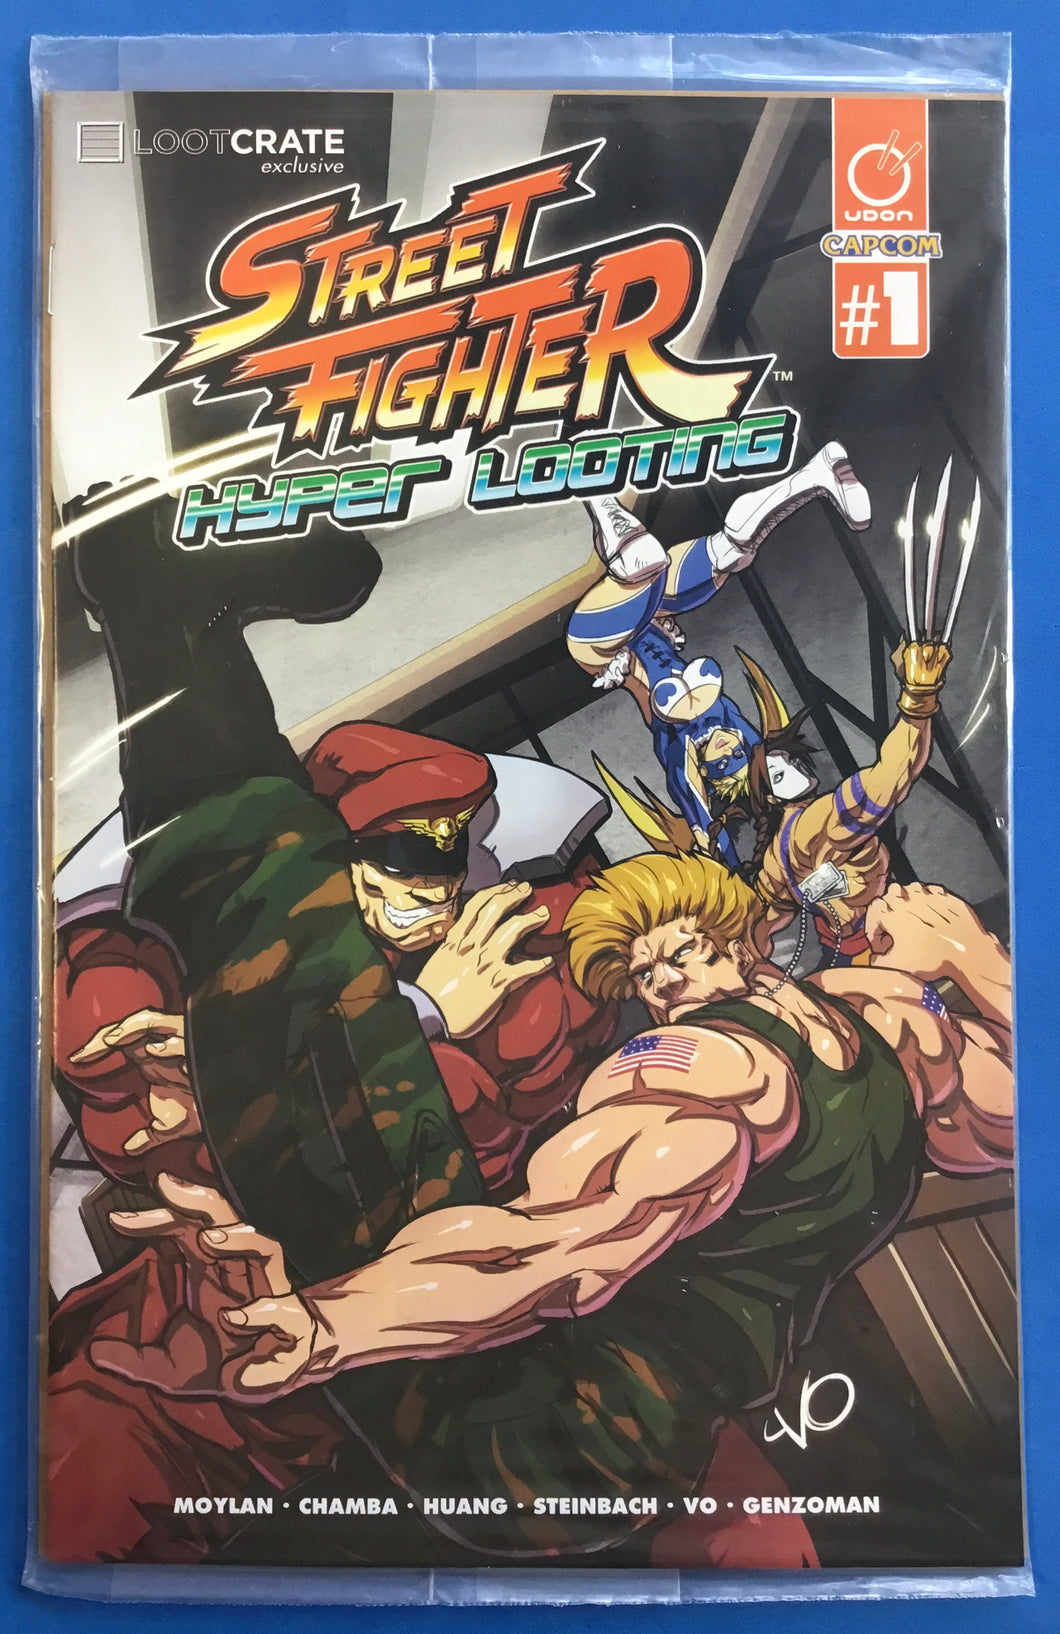 Street Fighter Hyper Looting No. #1 2015 Udon Comics Sealed